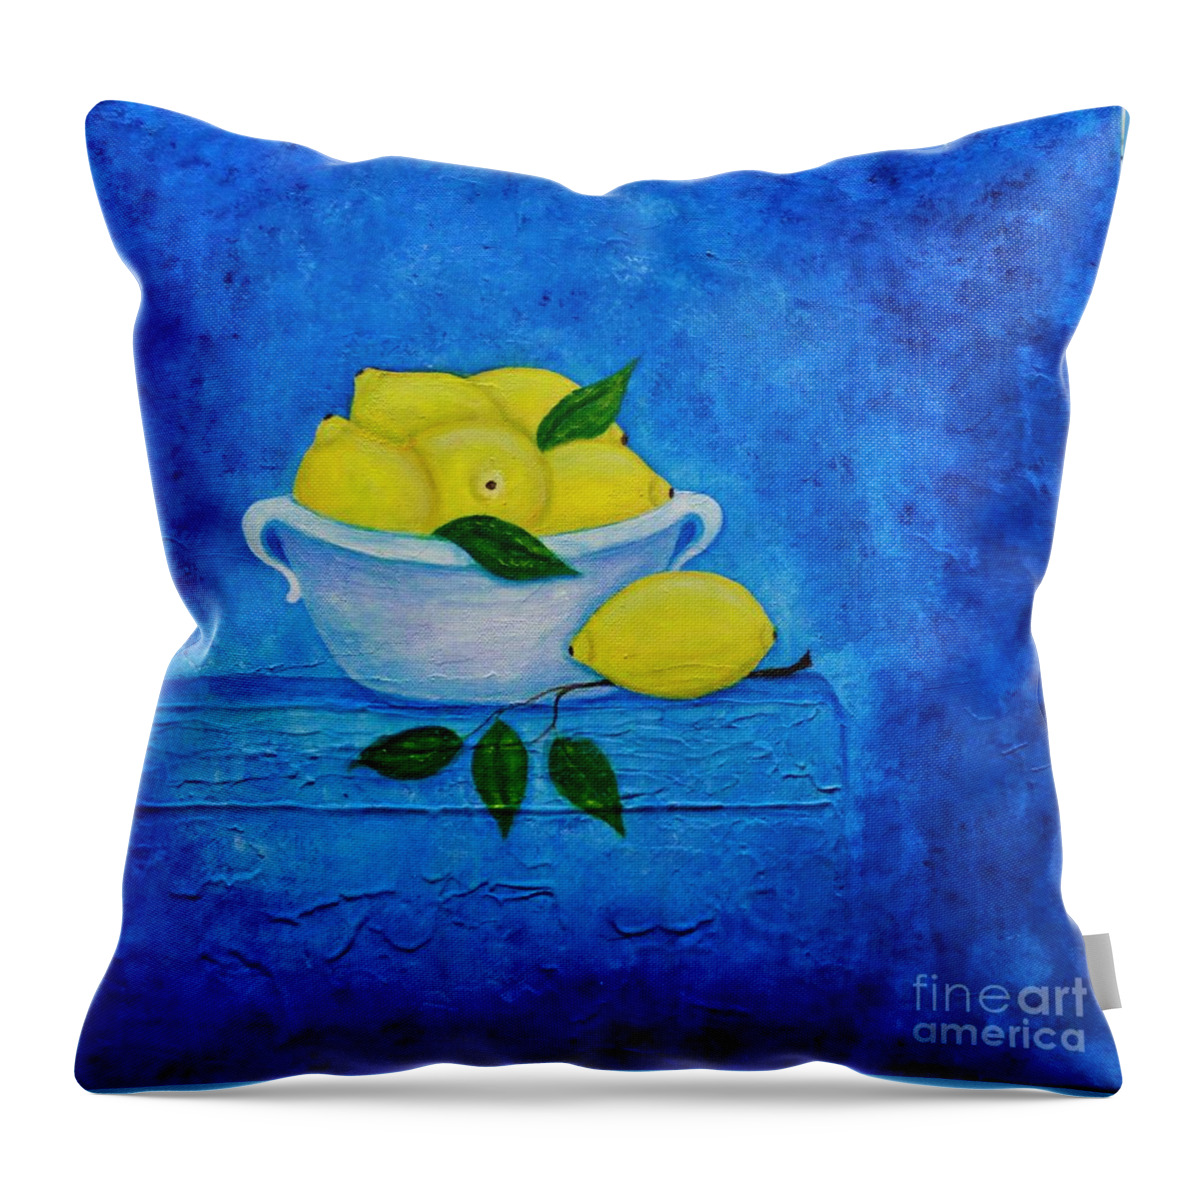 Lemon Still Life Throw Pillow featuring the painting Lemons by Irene Czys